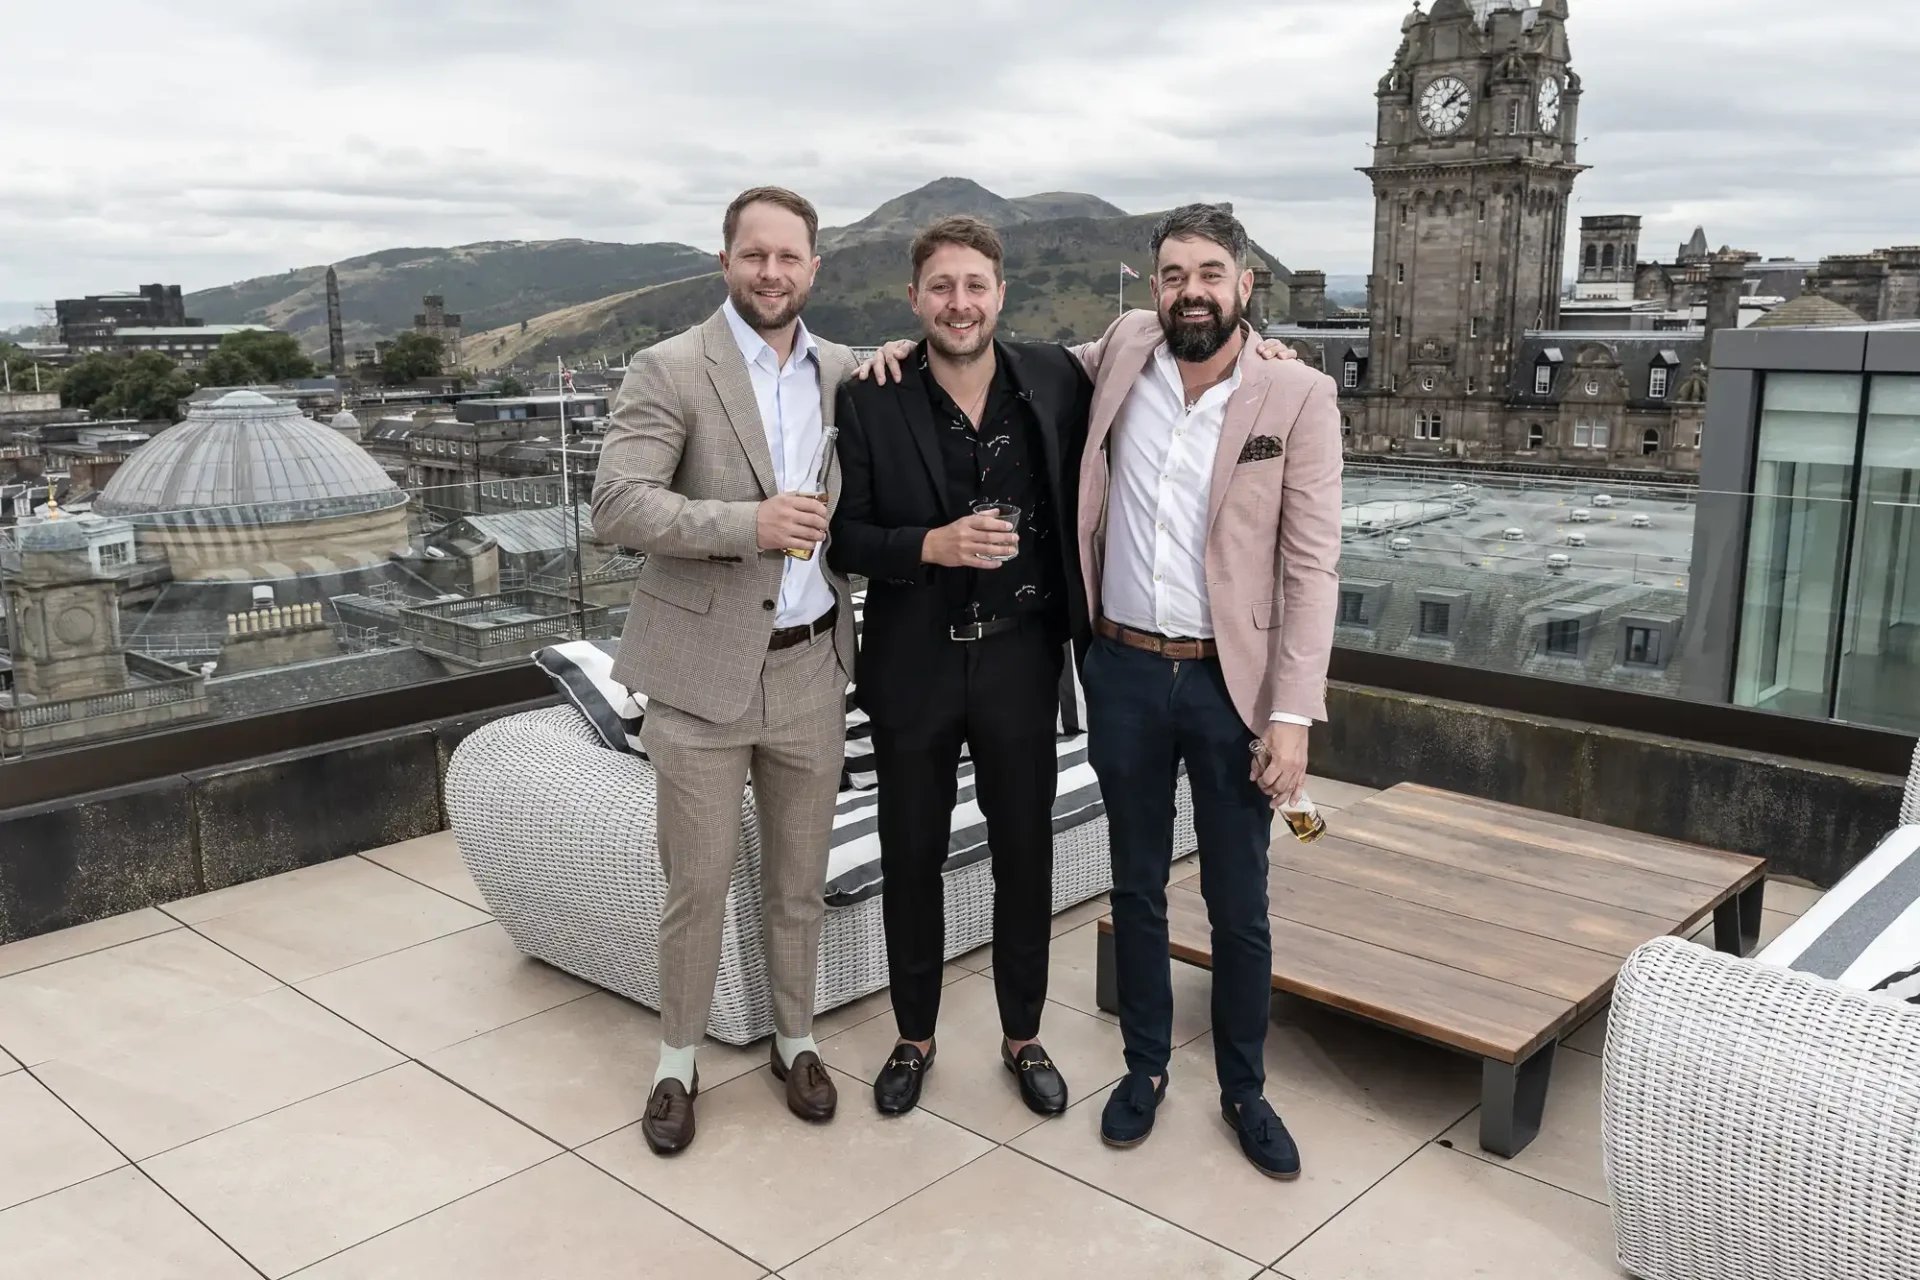 Three men in smart casual attire holding drinks on a rooftop terrace with cityscape and cloudy sky in the background.